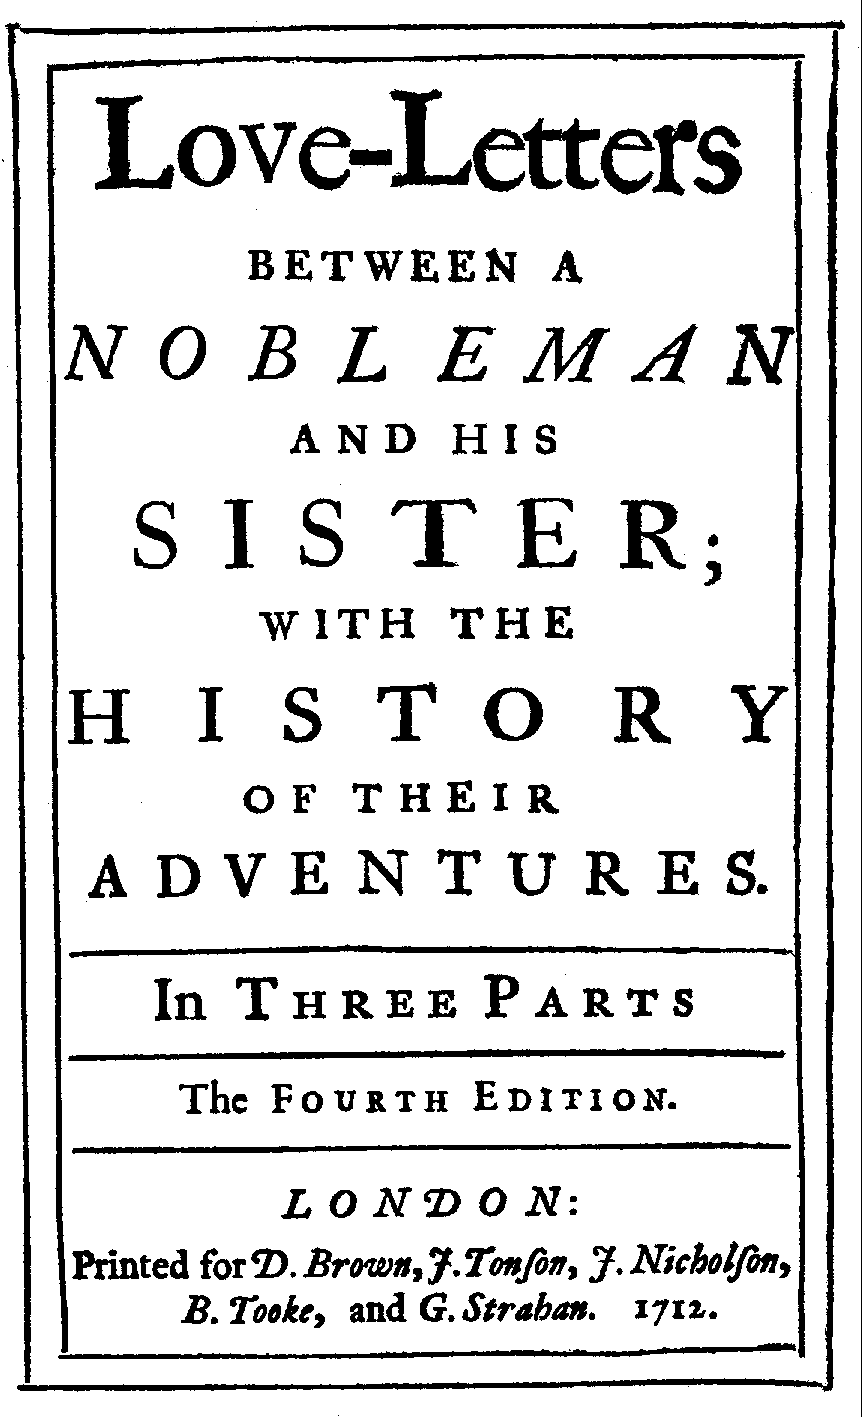 [Behn, Aphra i.e.] A. B., Love-Letters between a Nobleman and his Sister, pts. 1-3, 4th ed. (London: D. Brown/ J. Tonson/ J. Nicholson/ B. Tooke/ G. Strahan, 1712).